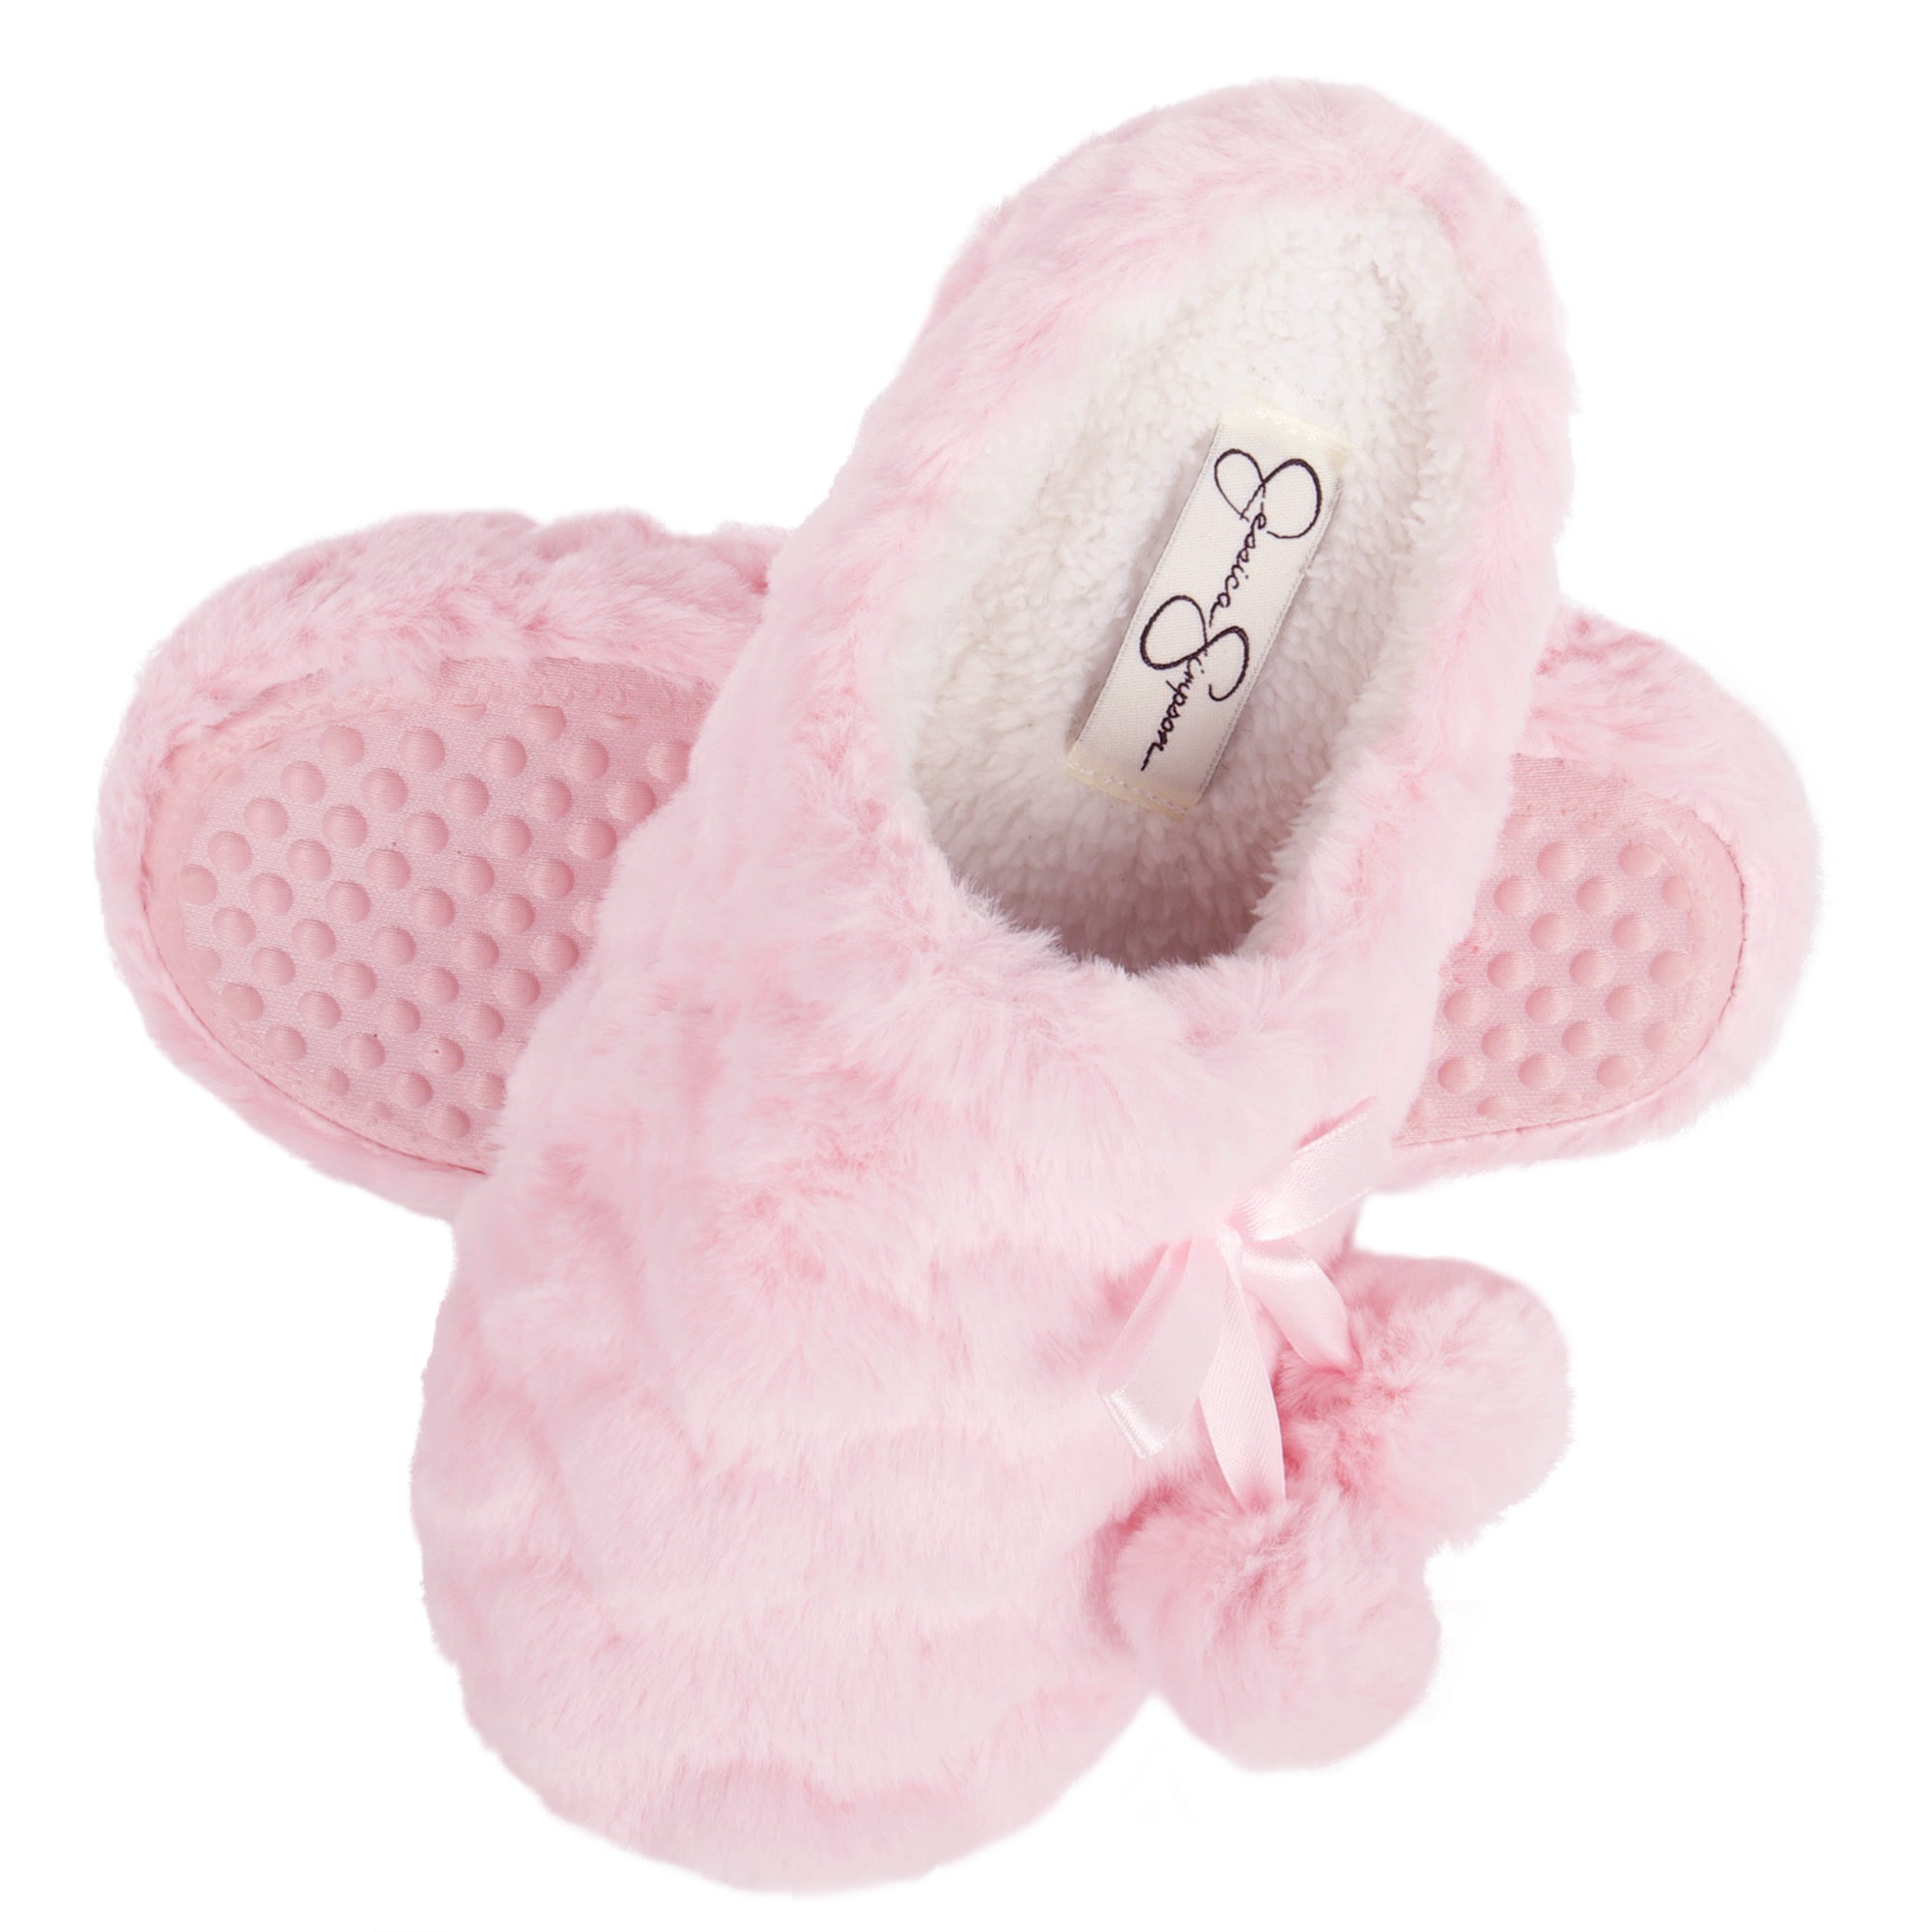 Comfy Memory Foam Slipper House Shoe with Cute Hearts and Pom Poms for Kids Jessica Simpson Girls Plush Slip-On Clogs 